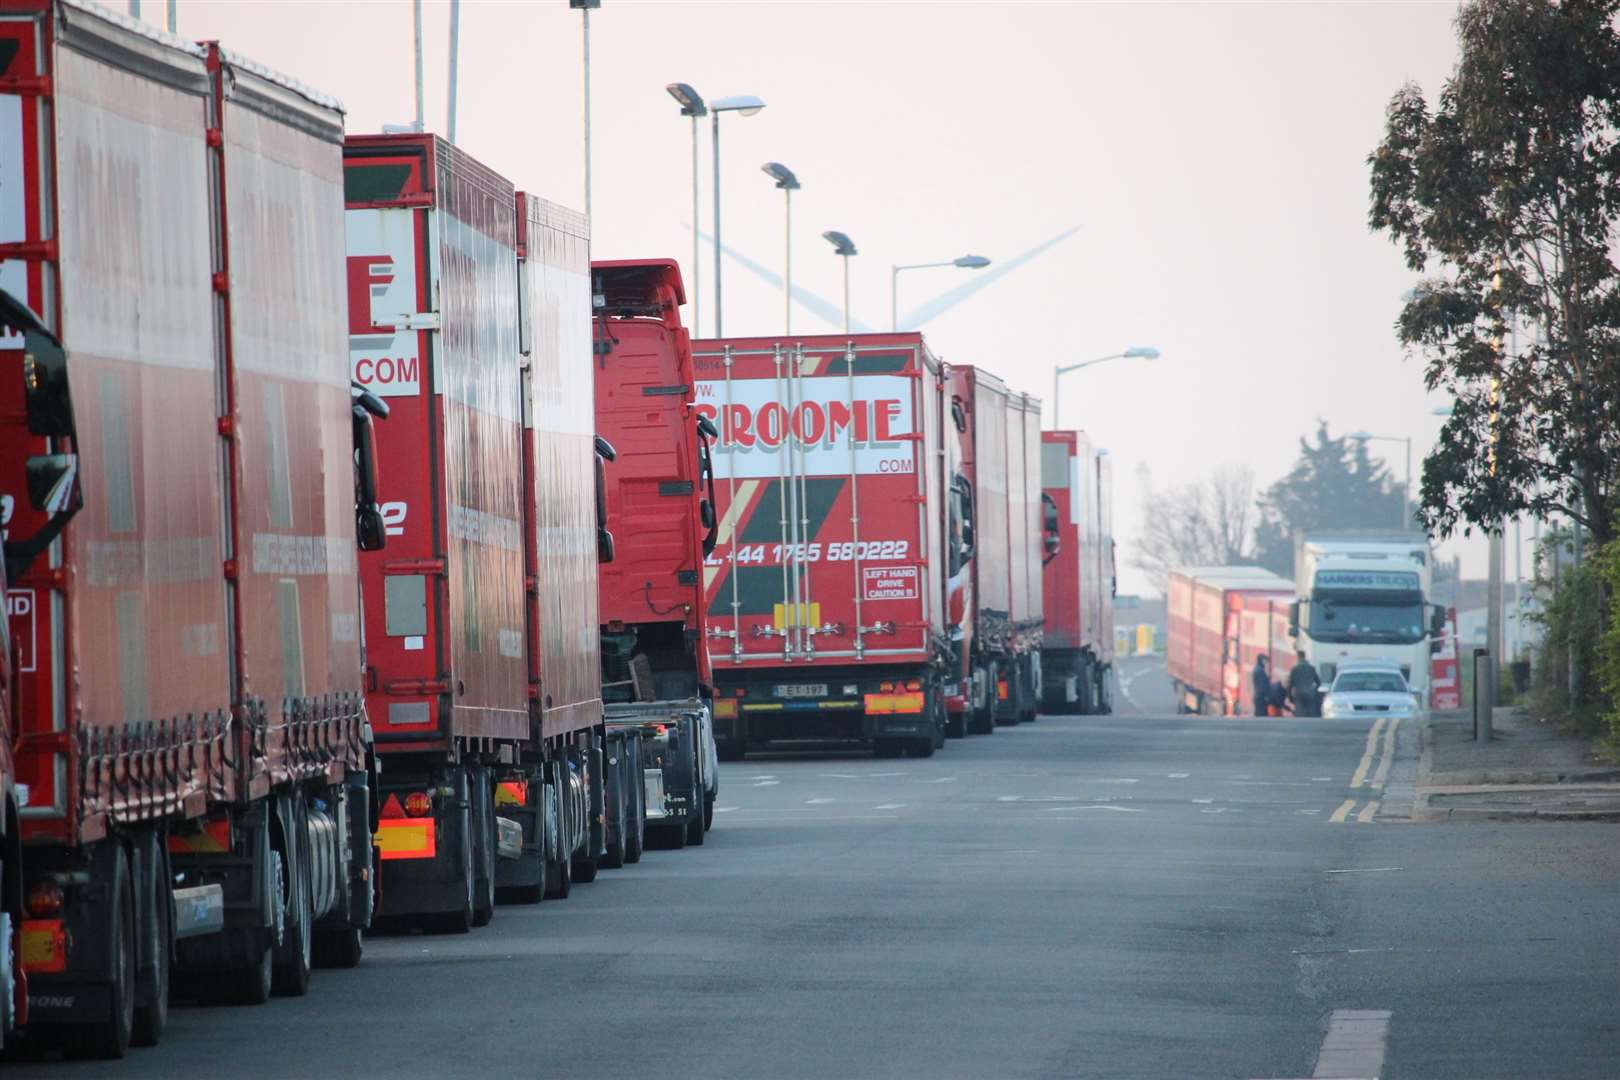 Lines of lorries parked up in Cullet Drive, Rushenden, Queenborough, Sheppey, near Neats Court